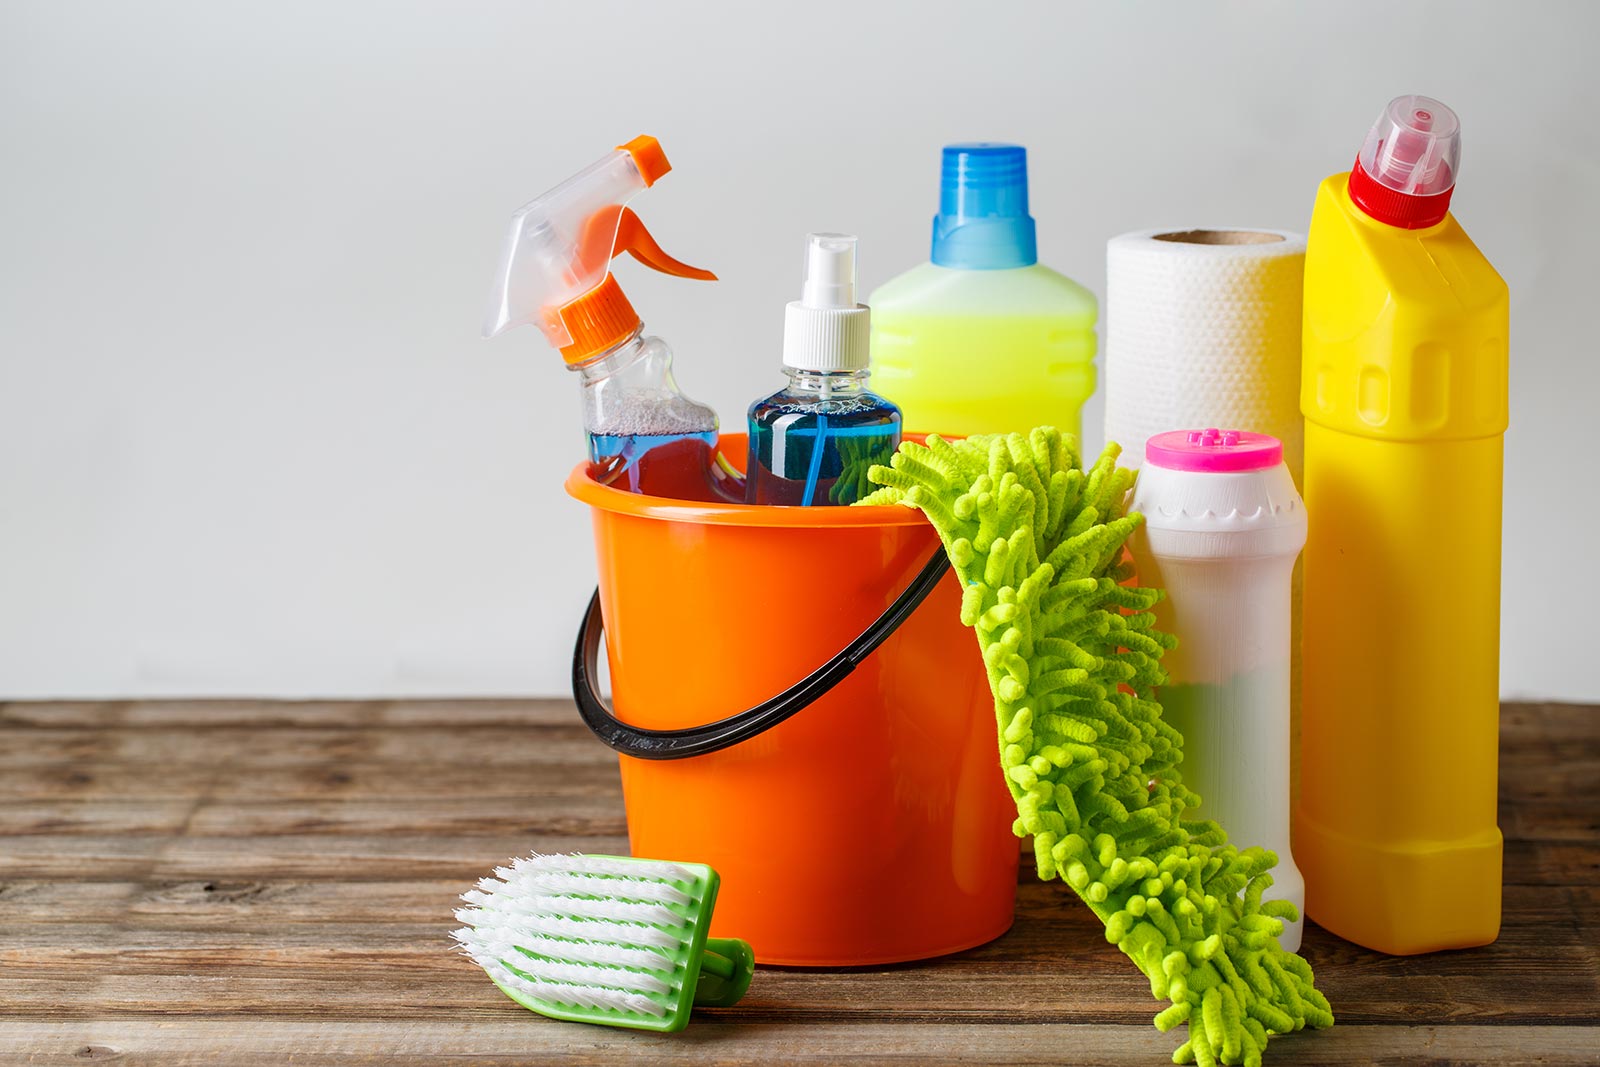 Spring Cleaning Tips to Spark Joy